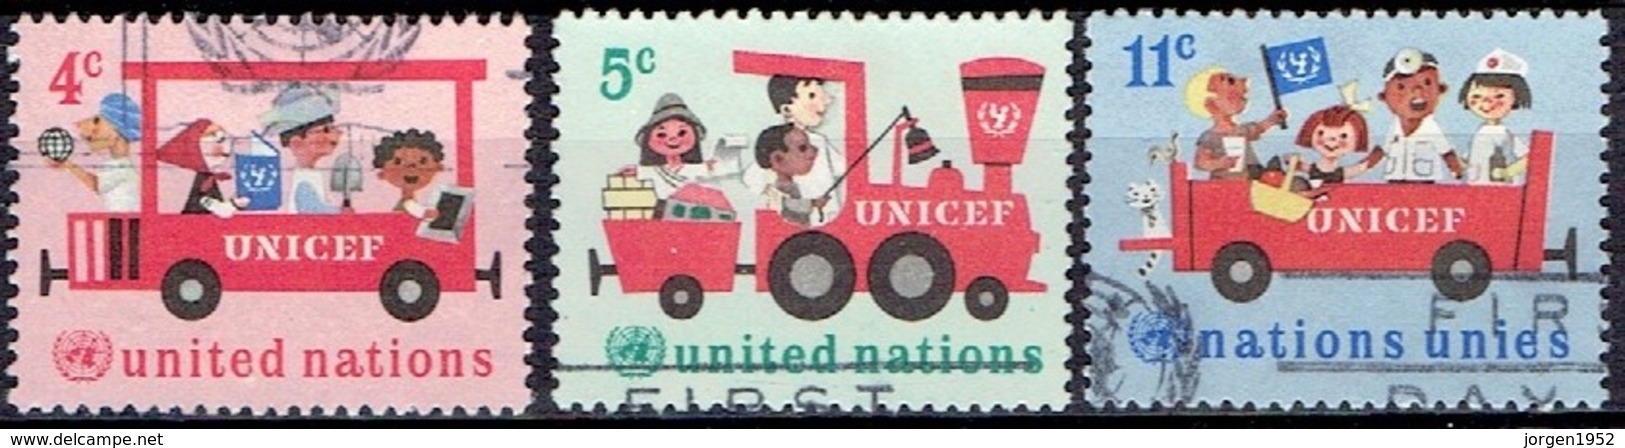 UNITED NATIONS # NEW YORK FROM 1966 STAMPWORLD 171-73 - Used Stamps